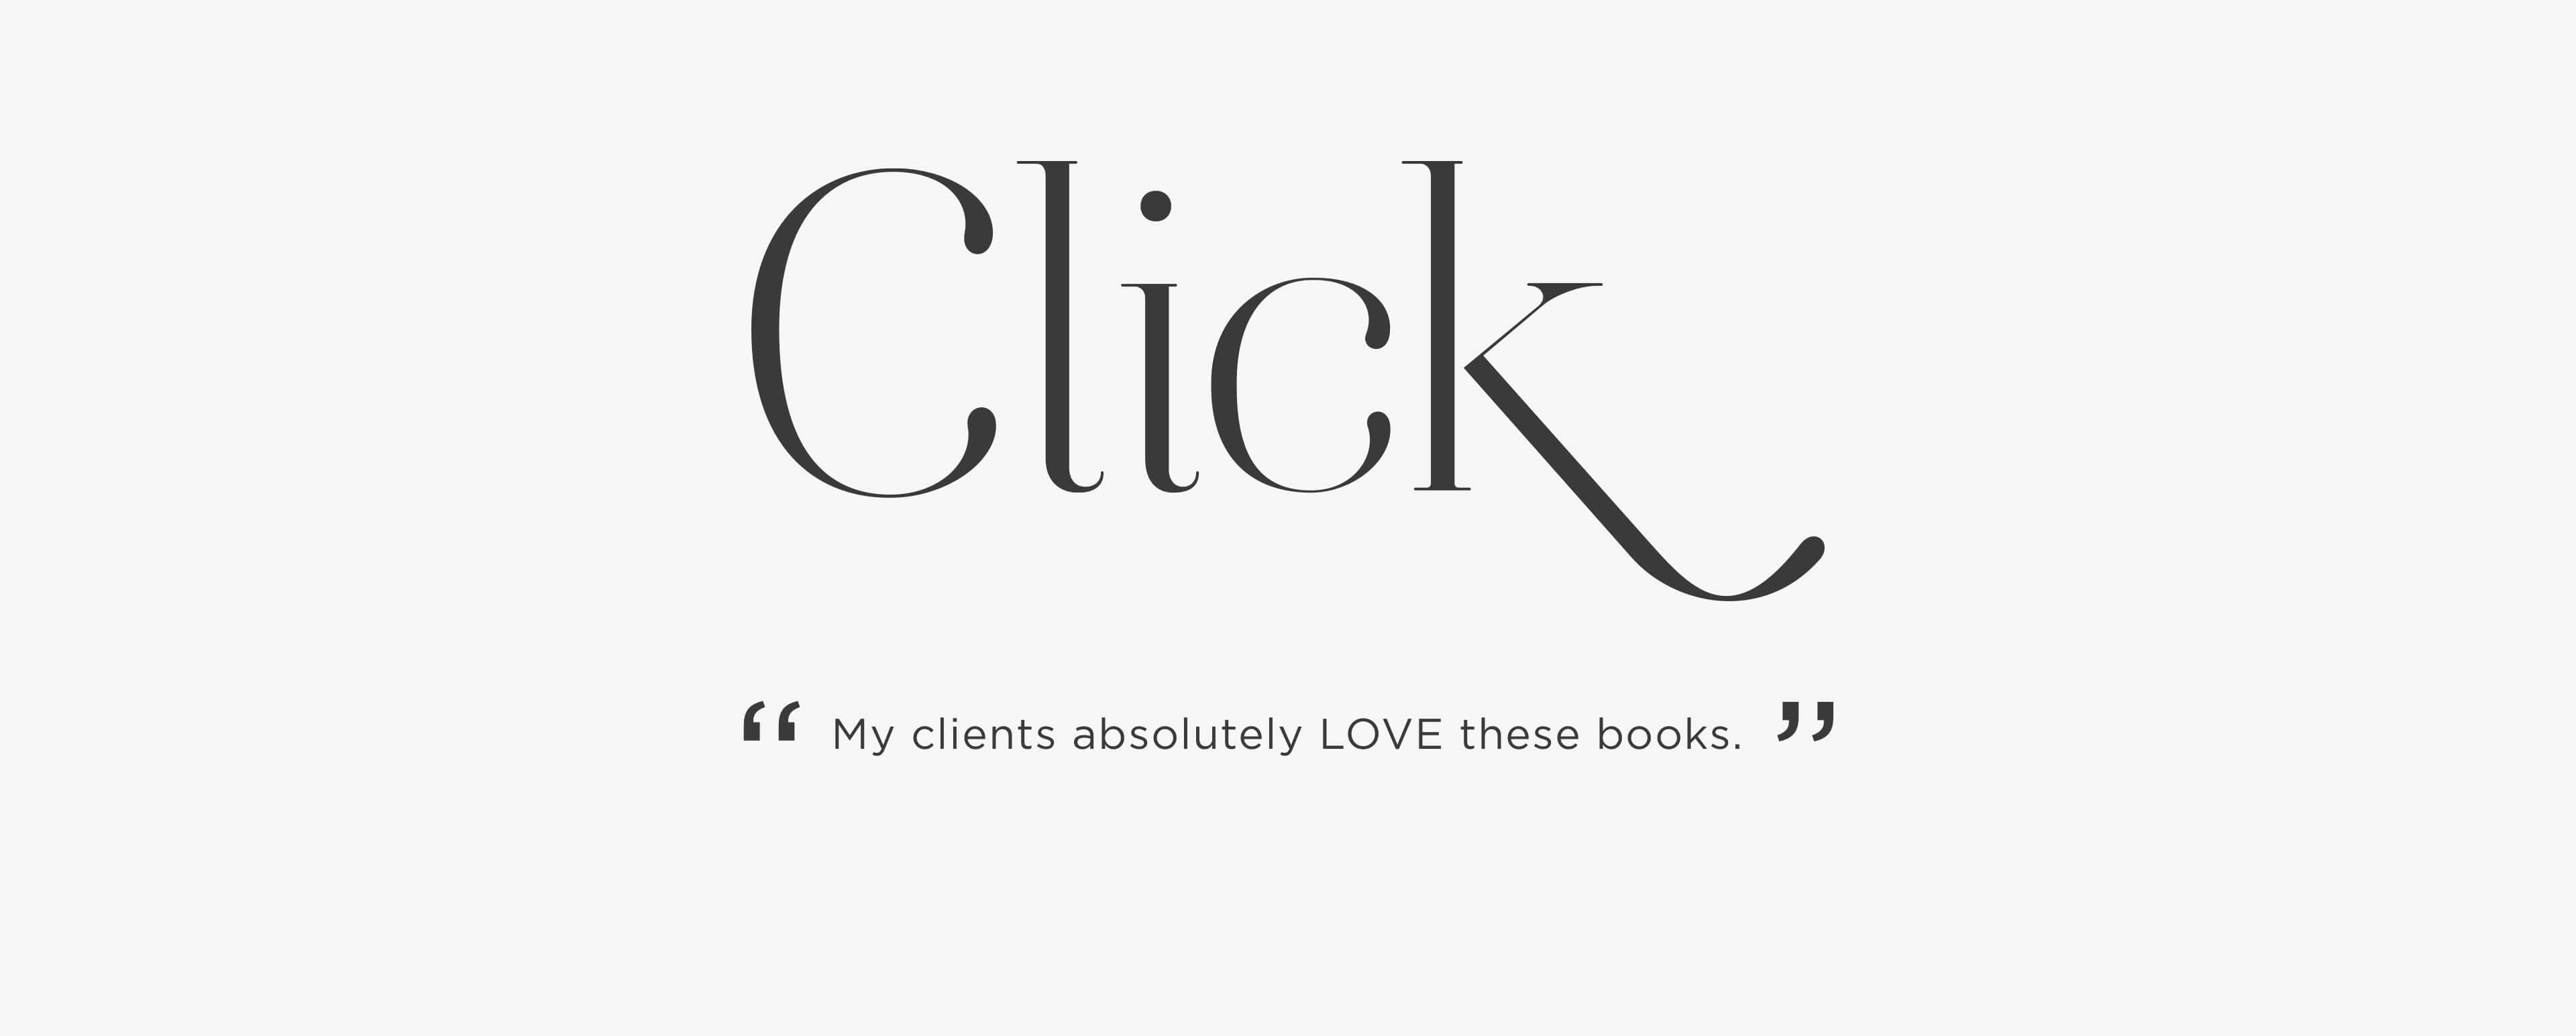 graphic a logo of click magazine and a quote